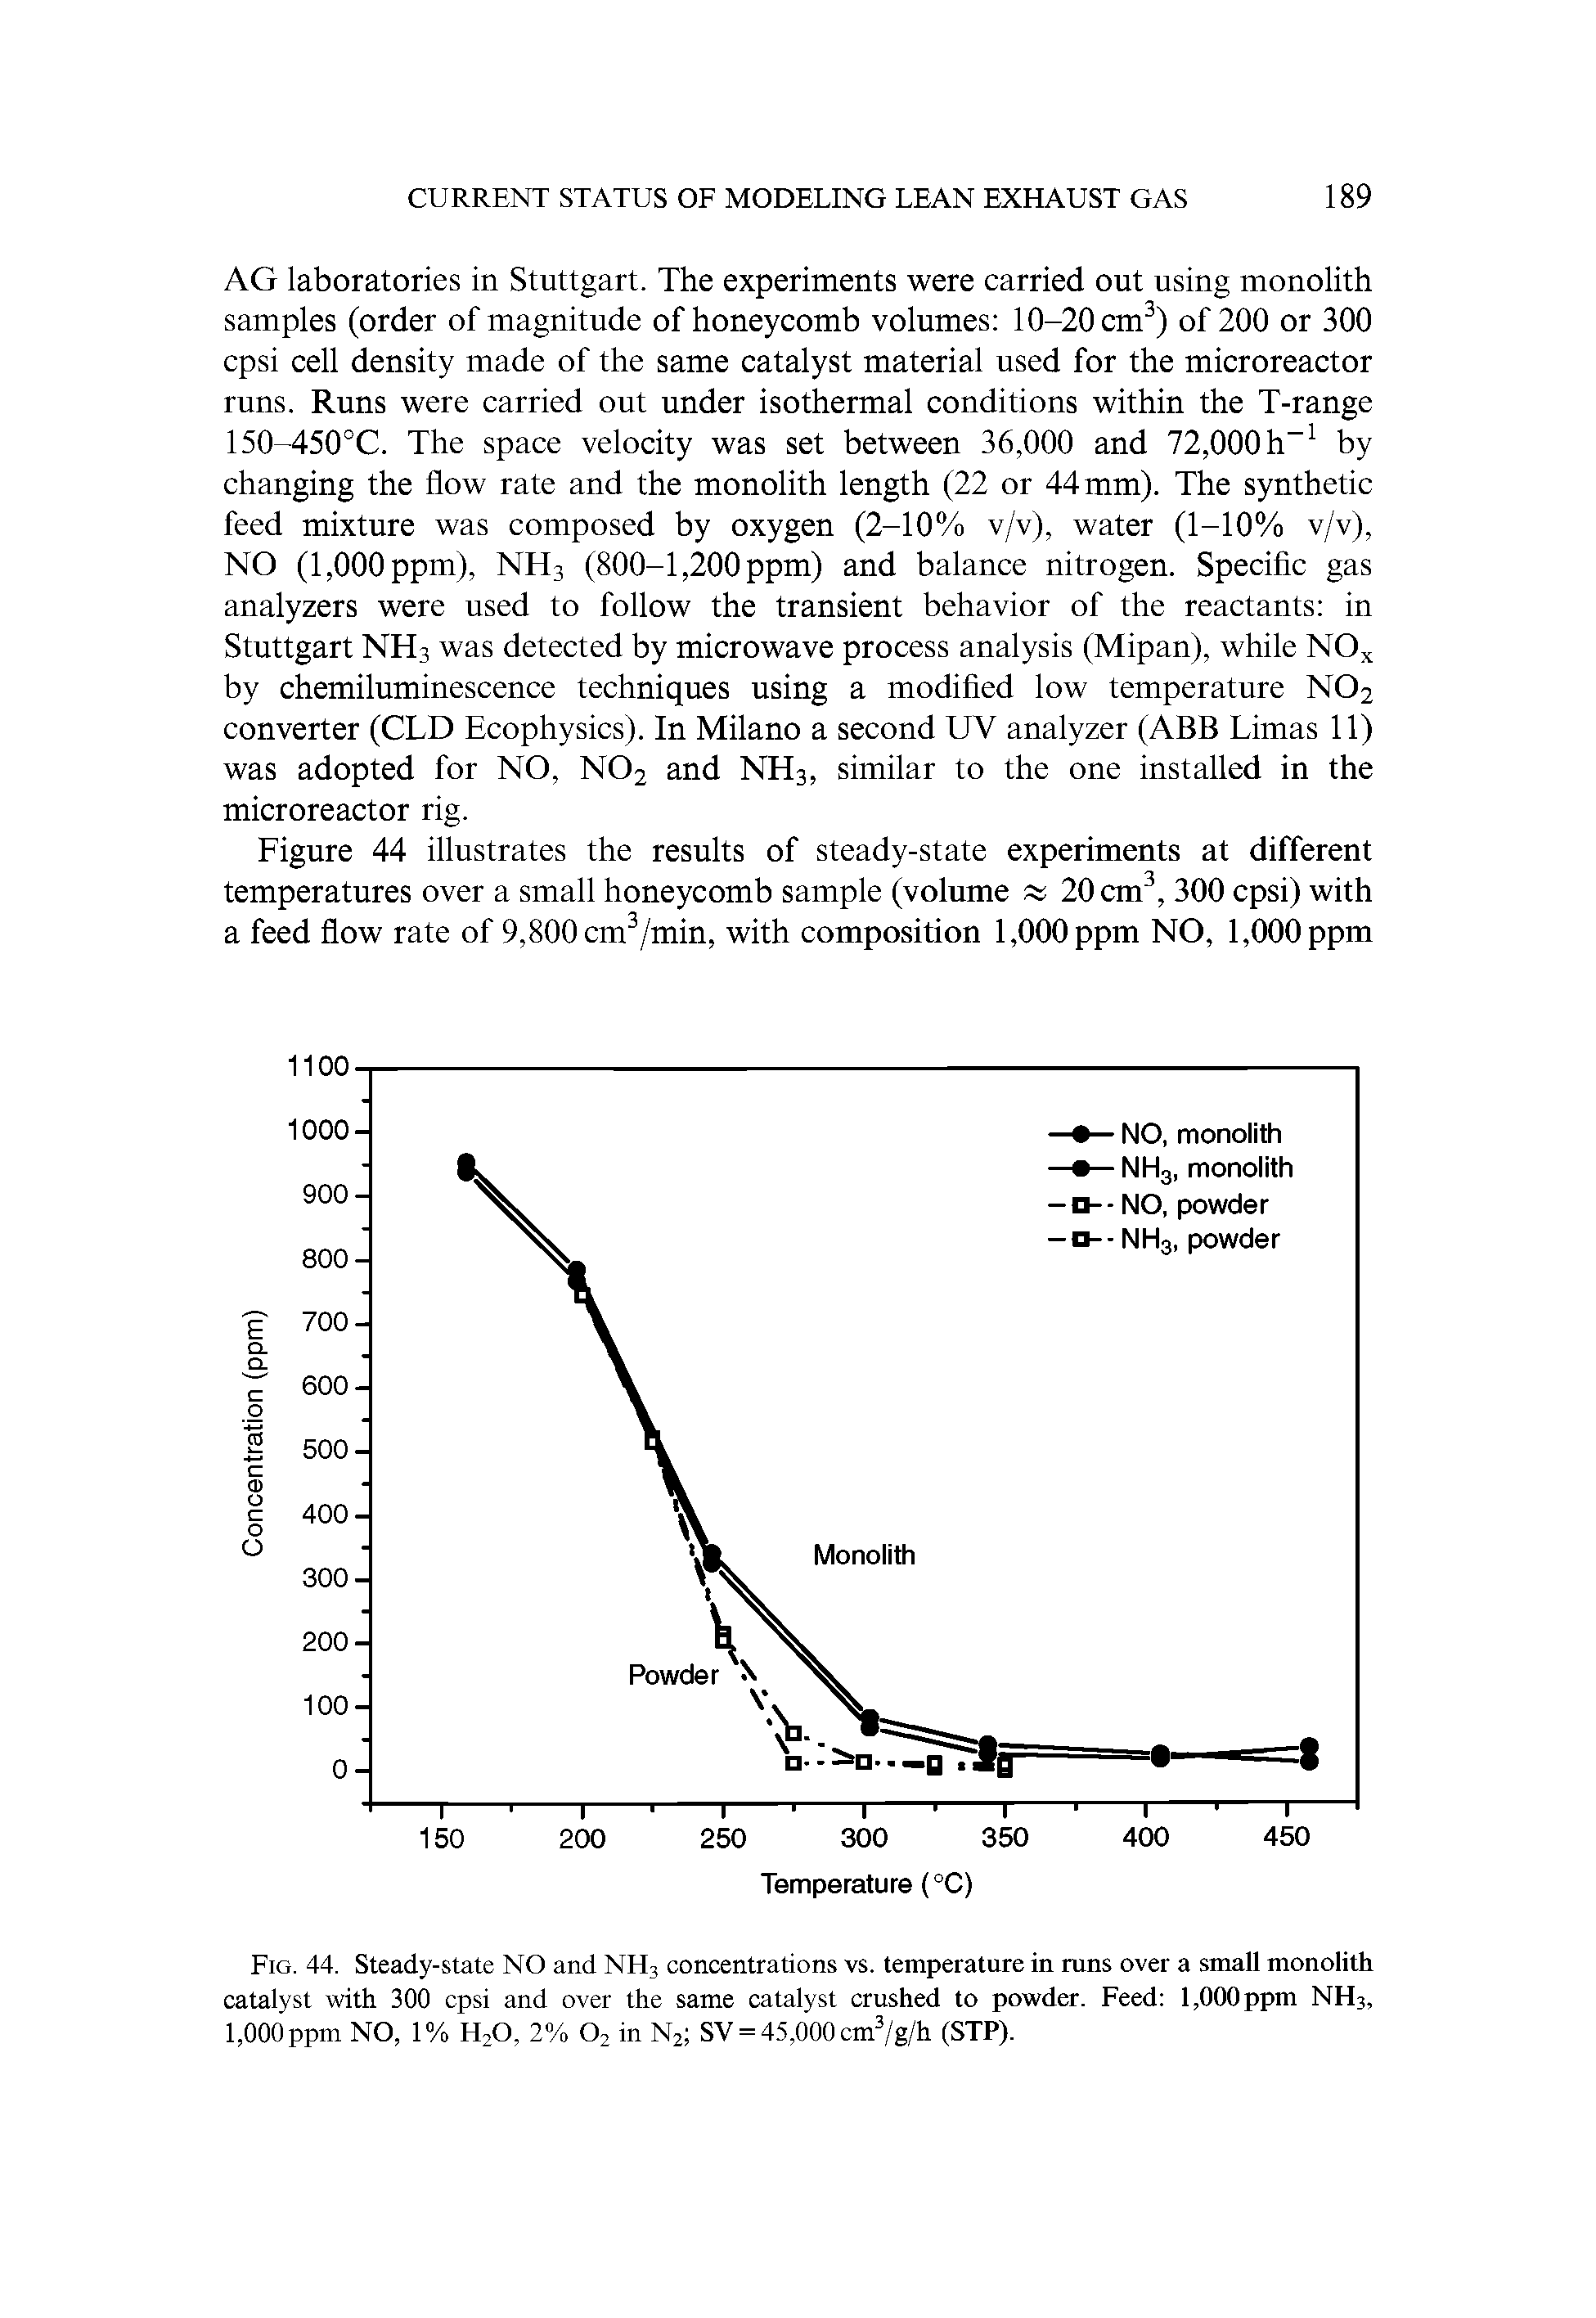 Fig. 44. Steady-state NO and NH3 concentrations vs. temperature in runs over a small monolith catalyst with 300 cpsi and over the same catalyst crushed to powder. Feed 1,000 ppm NH3, 1,000 ppm NO, 1% HzO, 2% Oz in N2 SV = 45,000 cm3/g/h (STP).